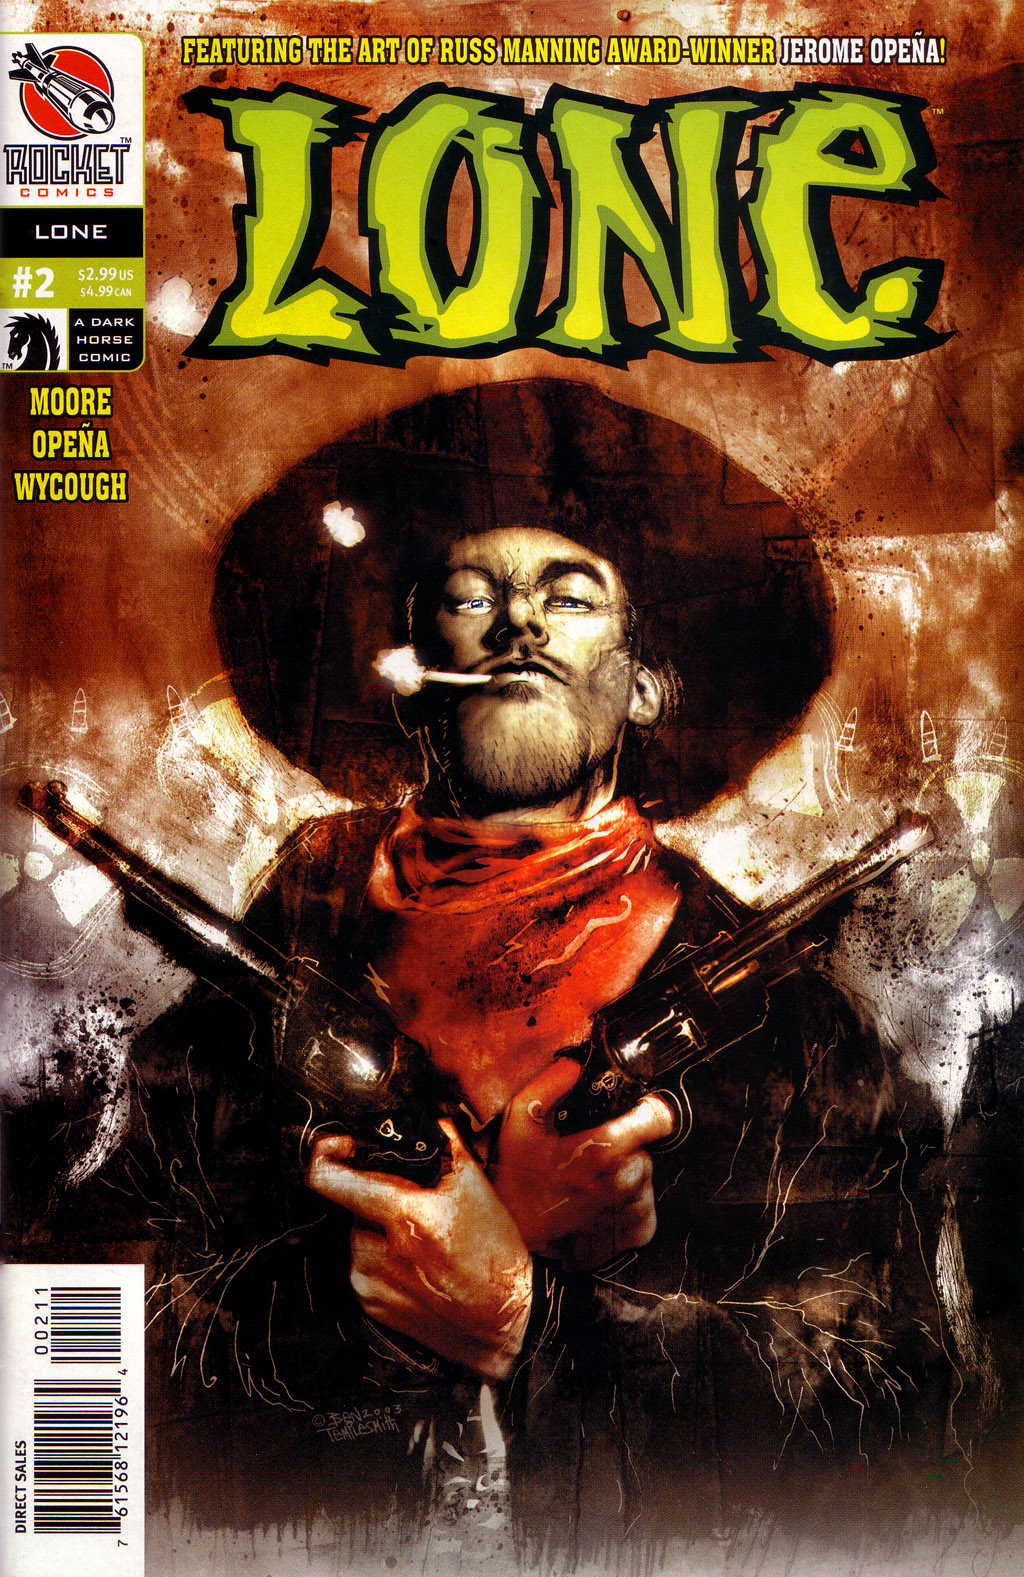 Read online Lone comic -  Issue #2 - 1